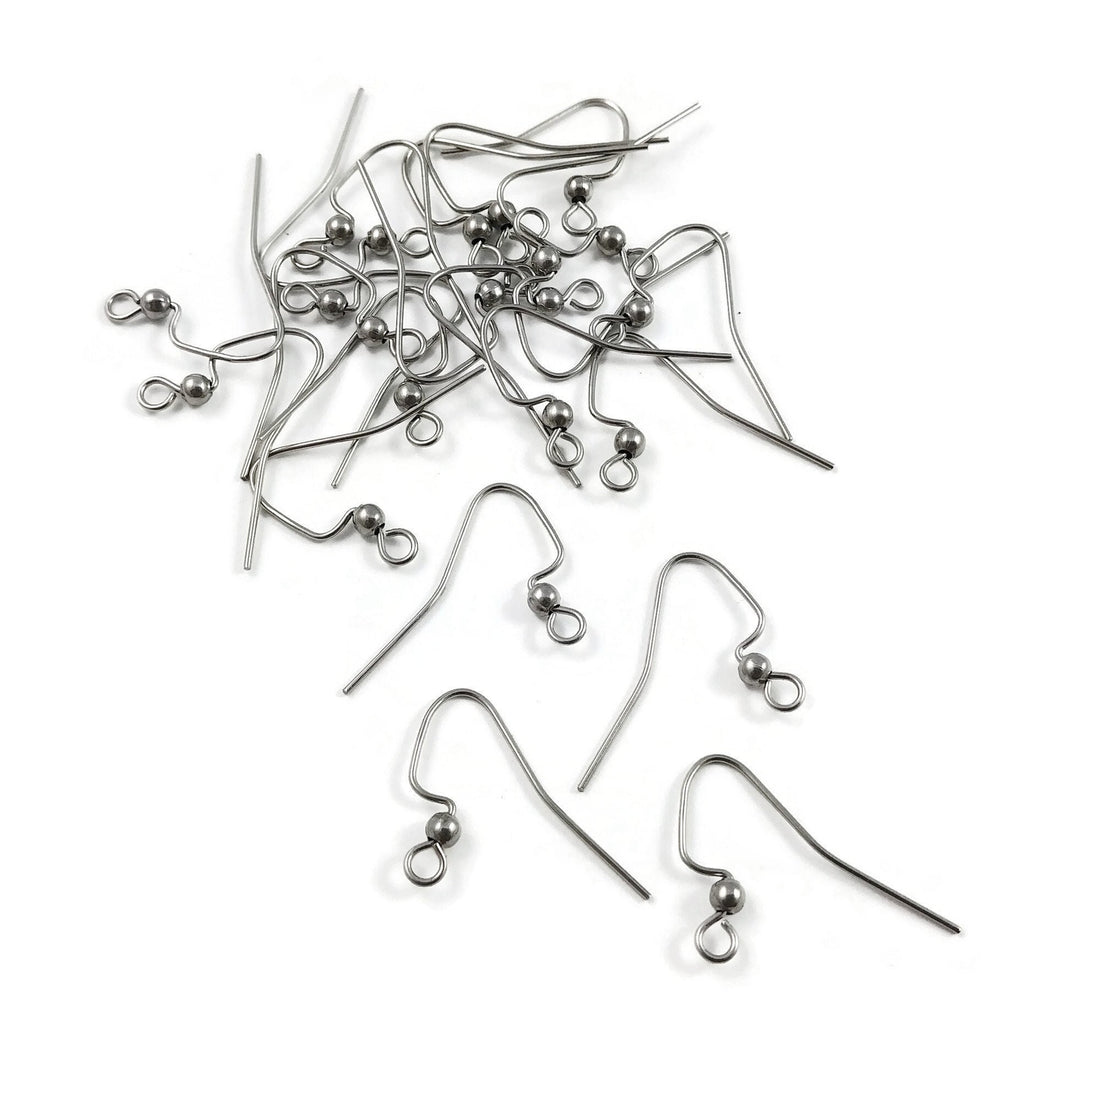 Shapenty 60PCS/30Pairs Stainless Steel Earring Hooks with Ball and Coil  Hypo-allergenic Earring Wires Fish Hooks Bulk for Earring Jewelry Making